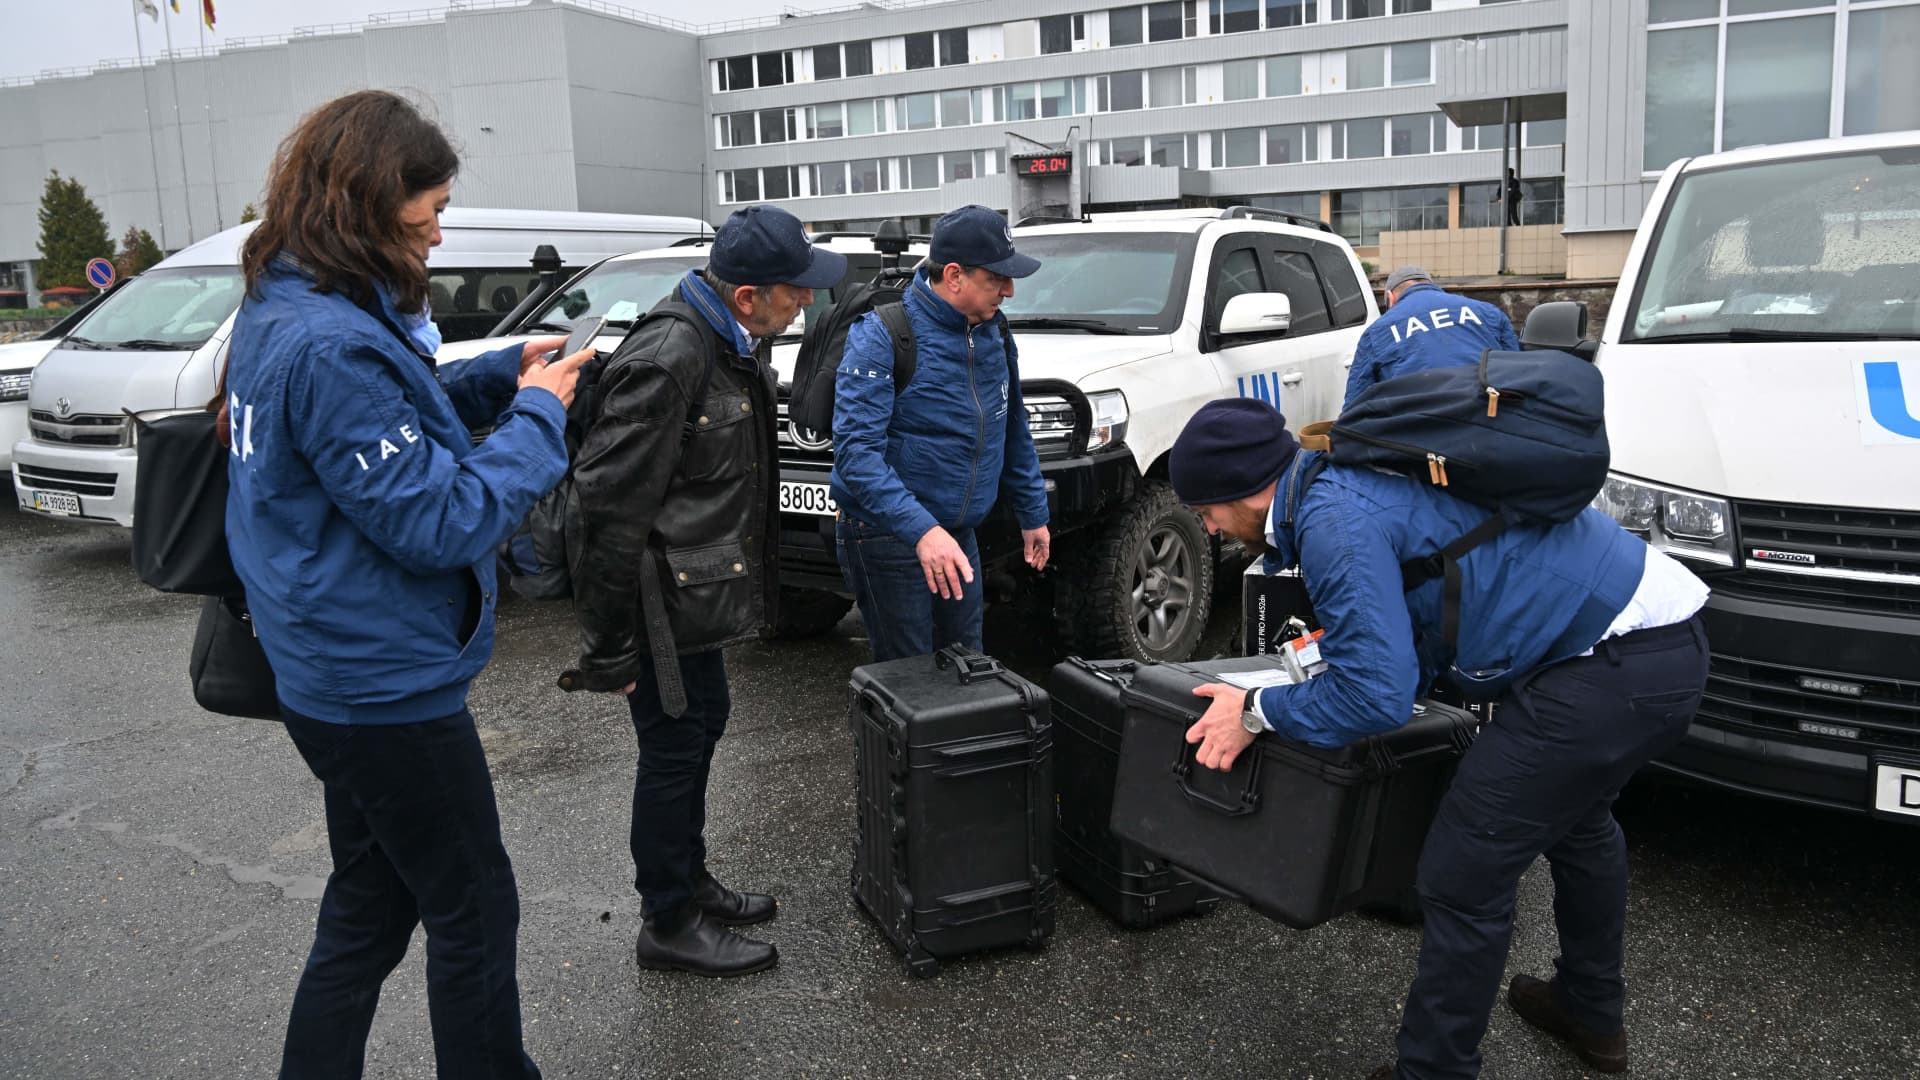 International Atomic Energy Agency (IAEA) employees unload equipments outside Chernobyl Nuclear Power Plant on April 26, 2022 on the 36th anniversary of the world's worst nuclear disaster. 